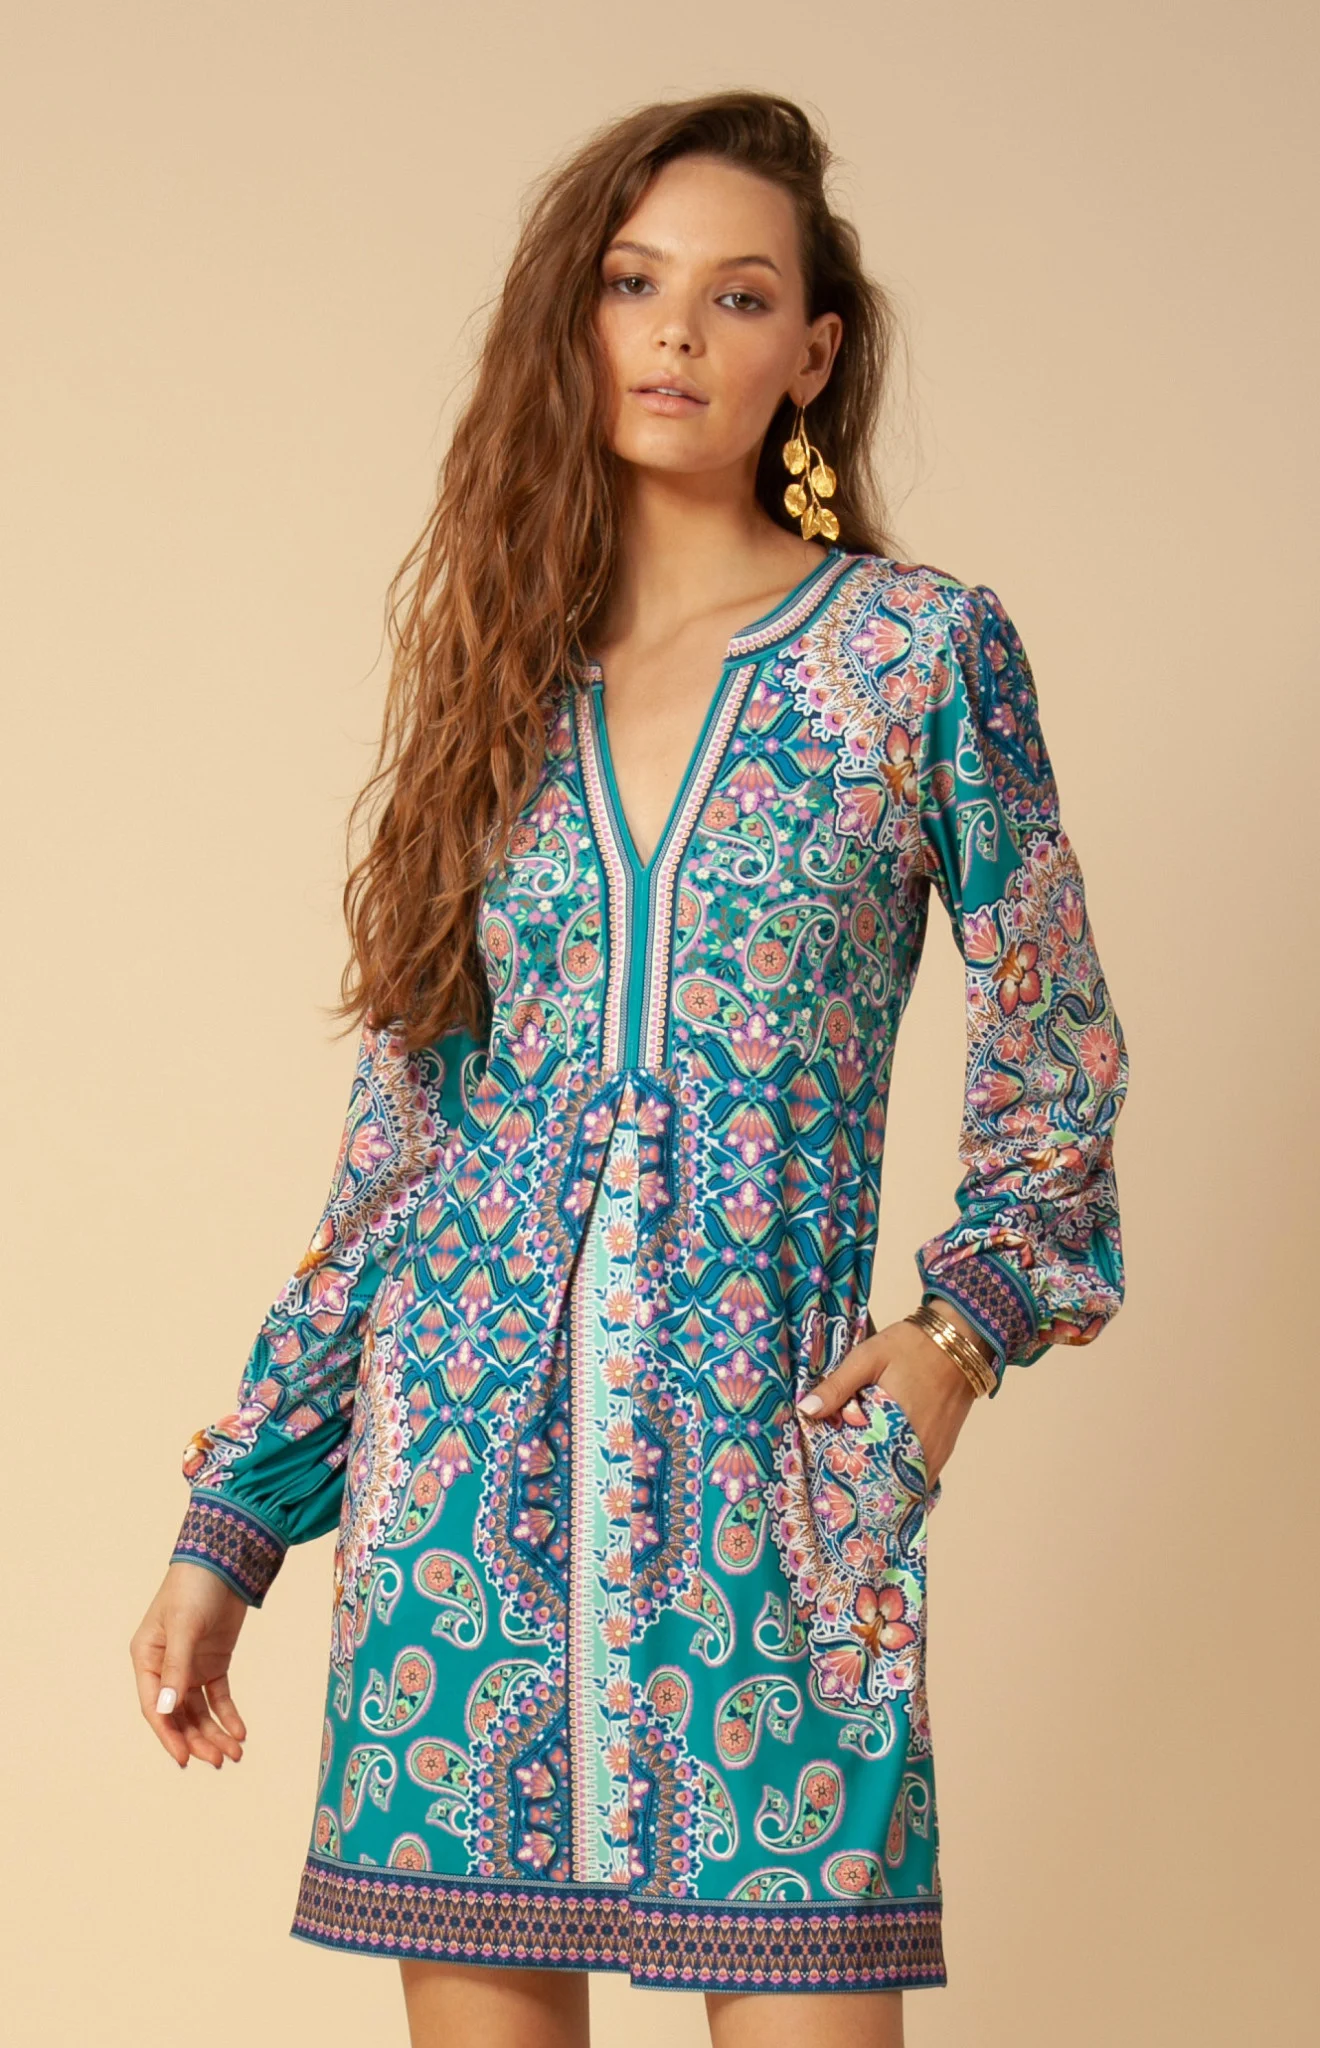 Floral Printed Resort Wear Outfits: Elevate Your Style in Paradise